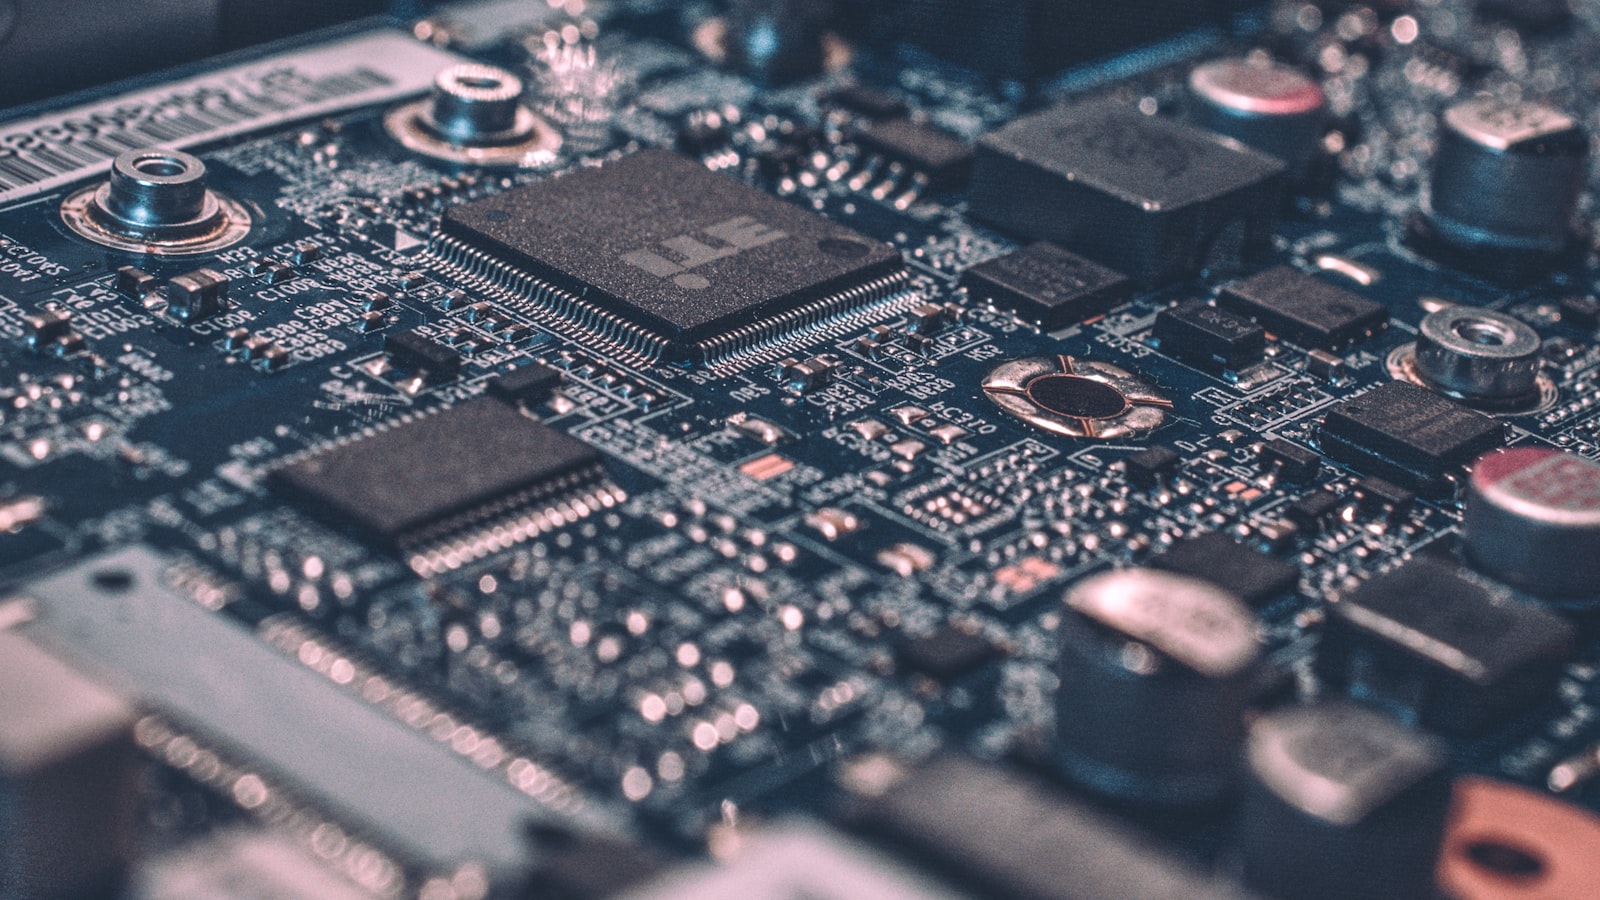 Afrika could solve the global computer chip shortage